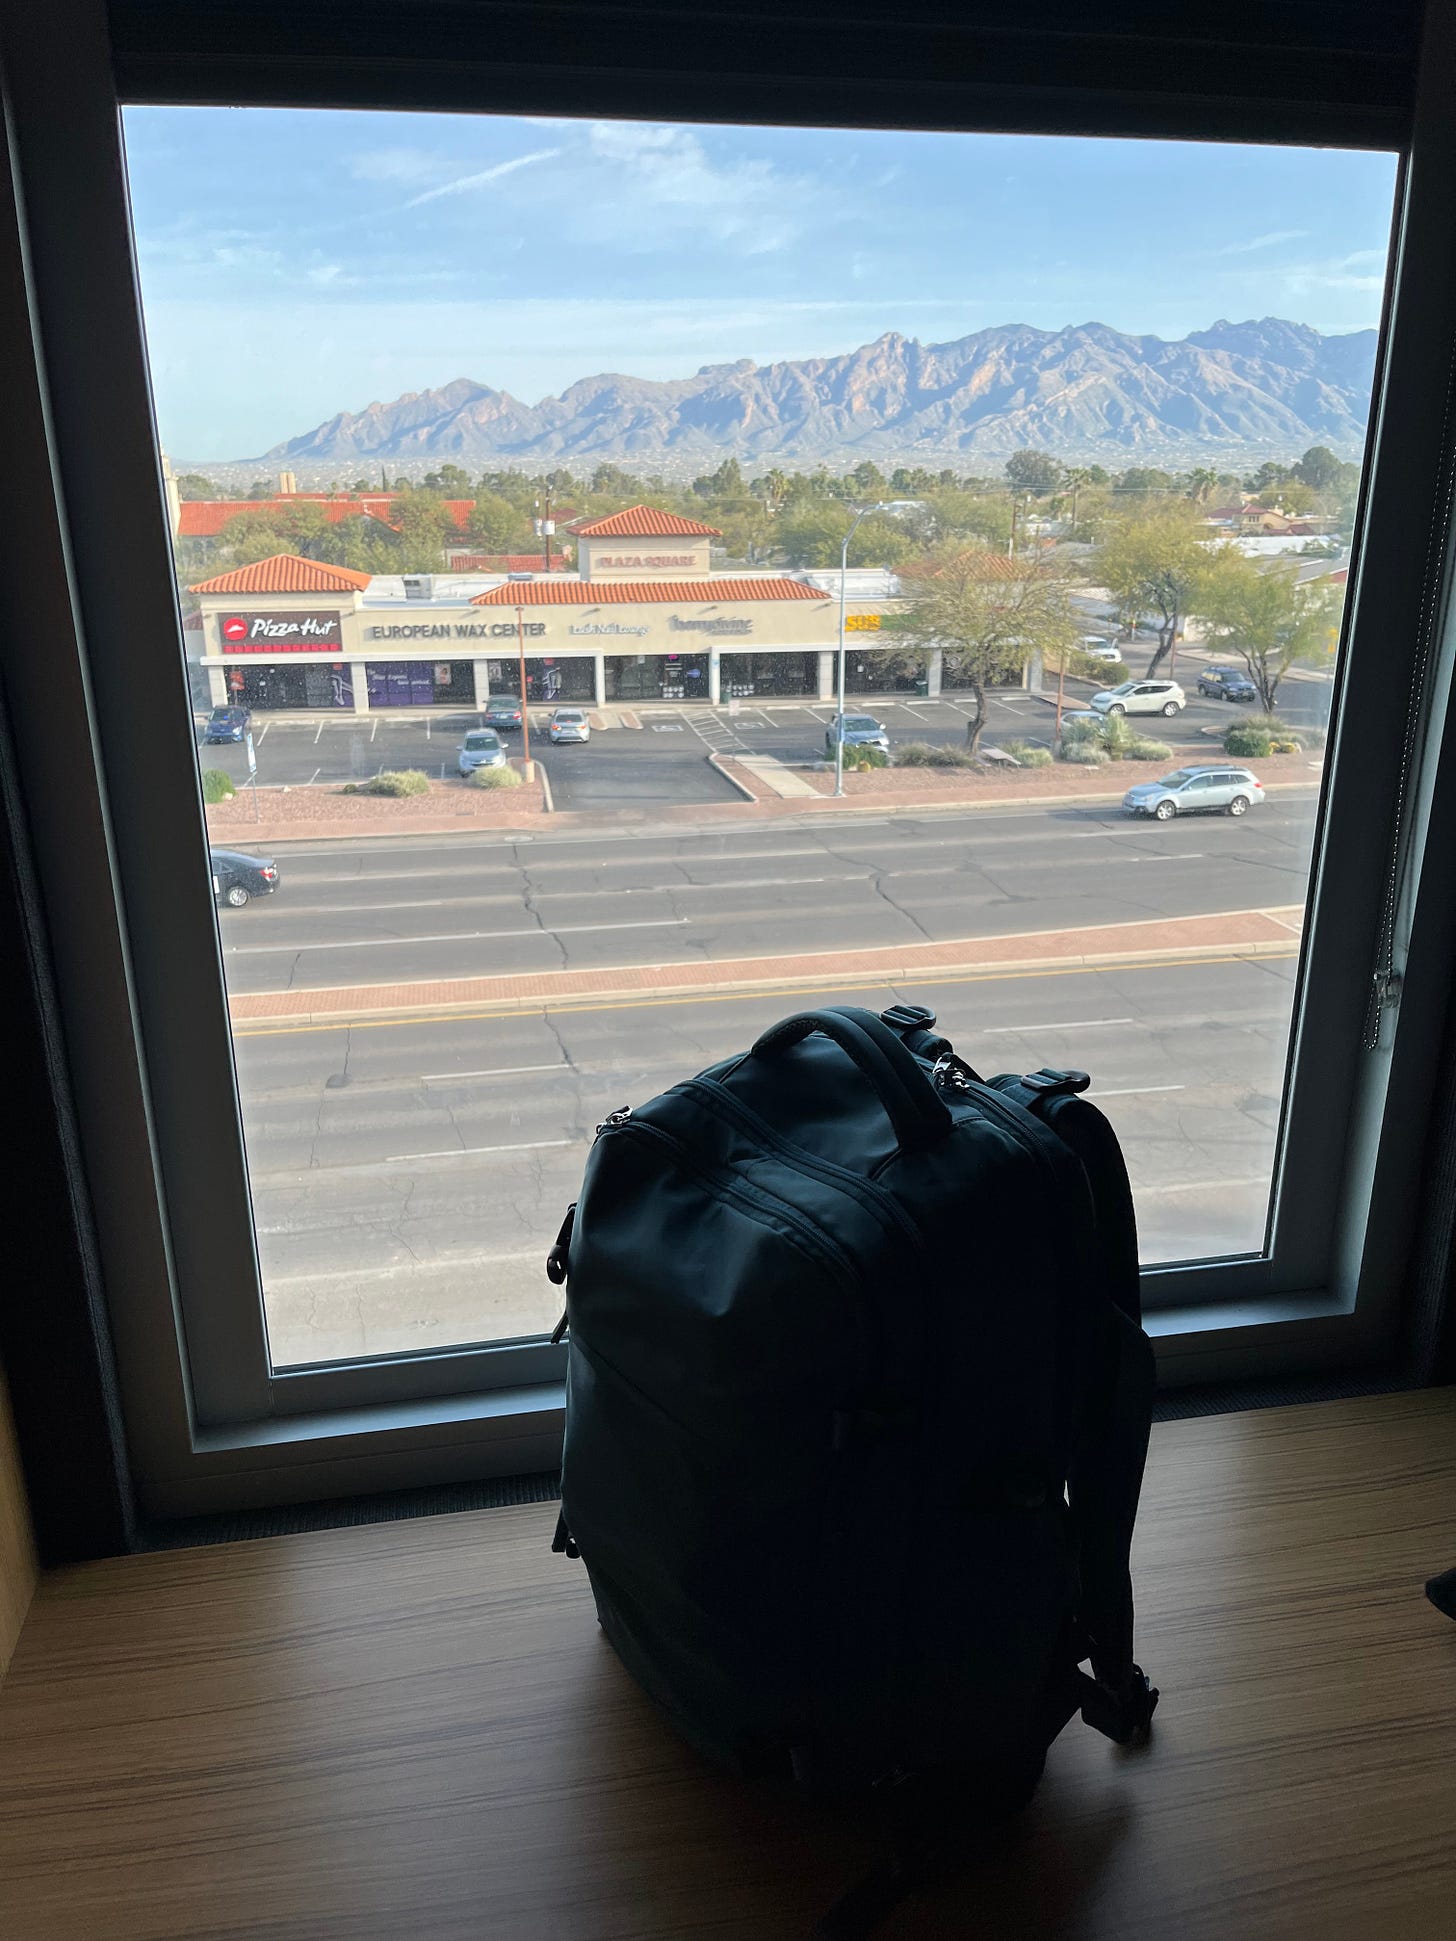 Picture of the view outside my hotel window, showing the Catalina mountains, a strip mall, and my single backpack propped up in front of it